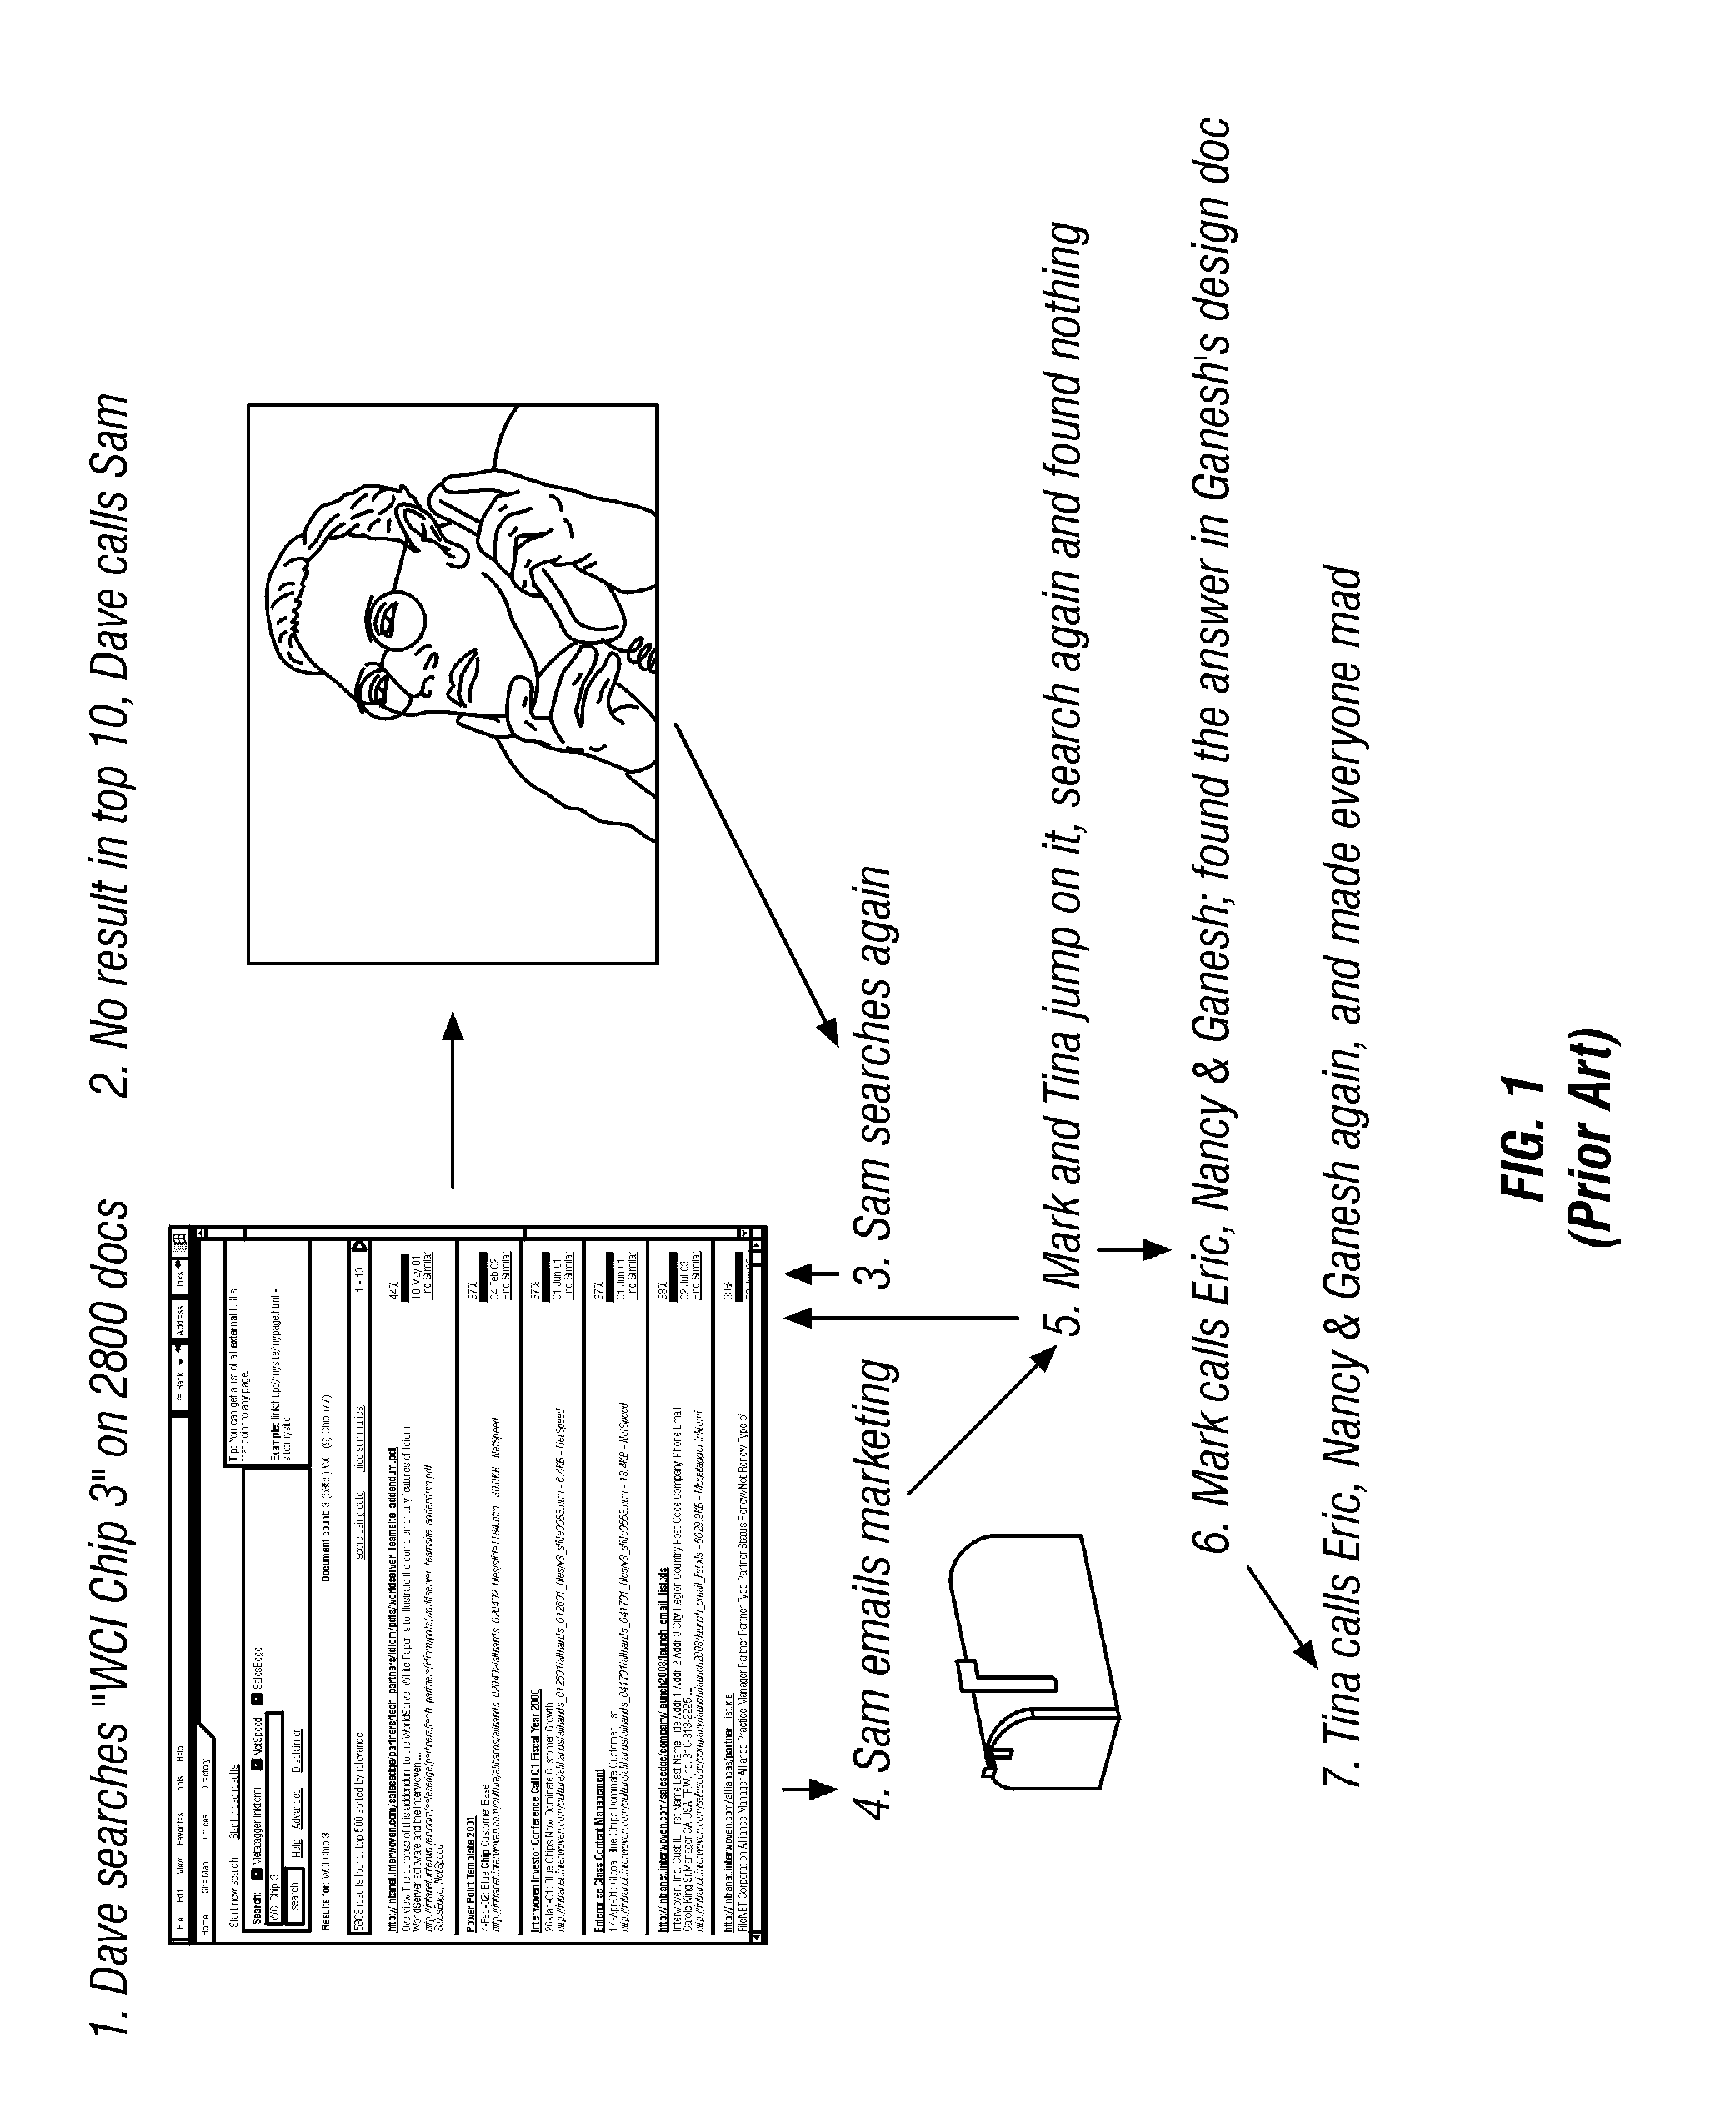 Method and apparatus for predicting destinations in a navigation context based upon observed usage patterns